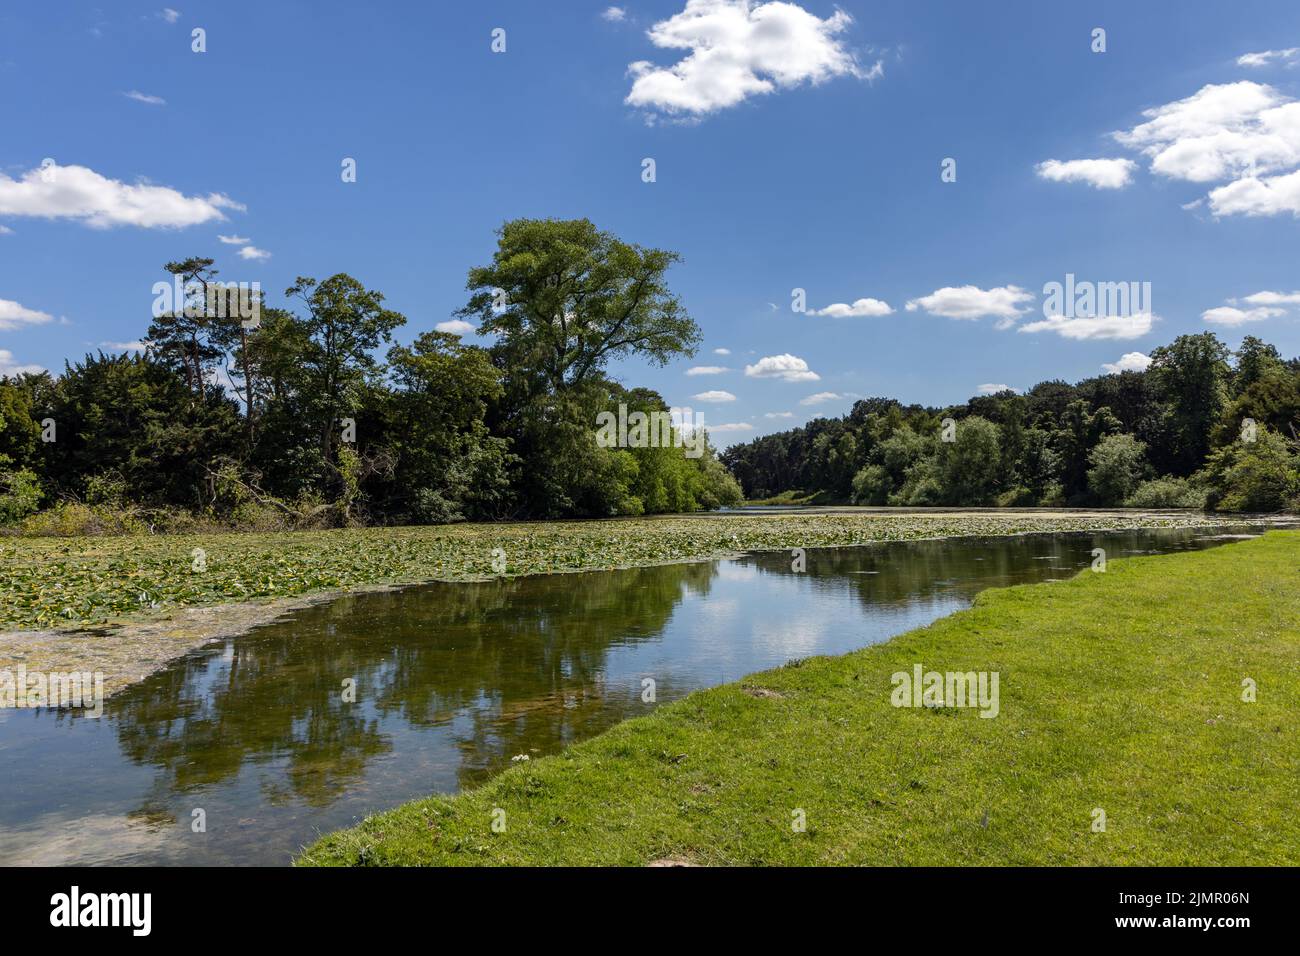 Parkland and lake at Scampston, designed by Capability Brown, Scampston Hall,  North Yorkshire, England. Stock Photo